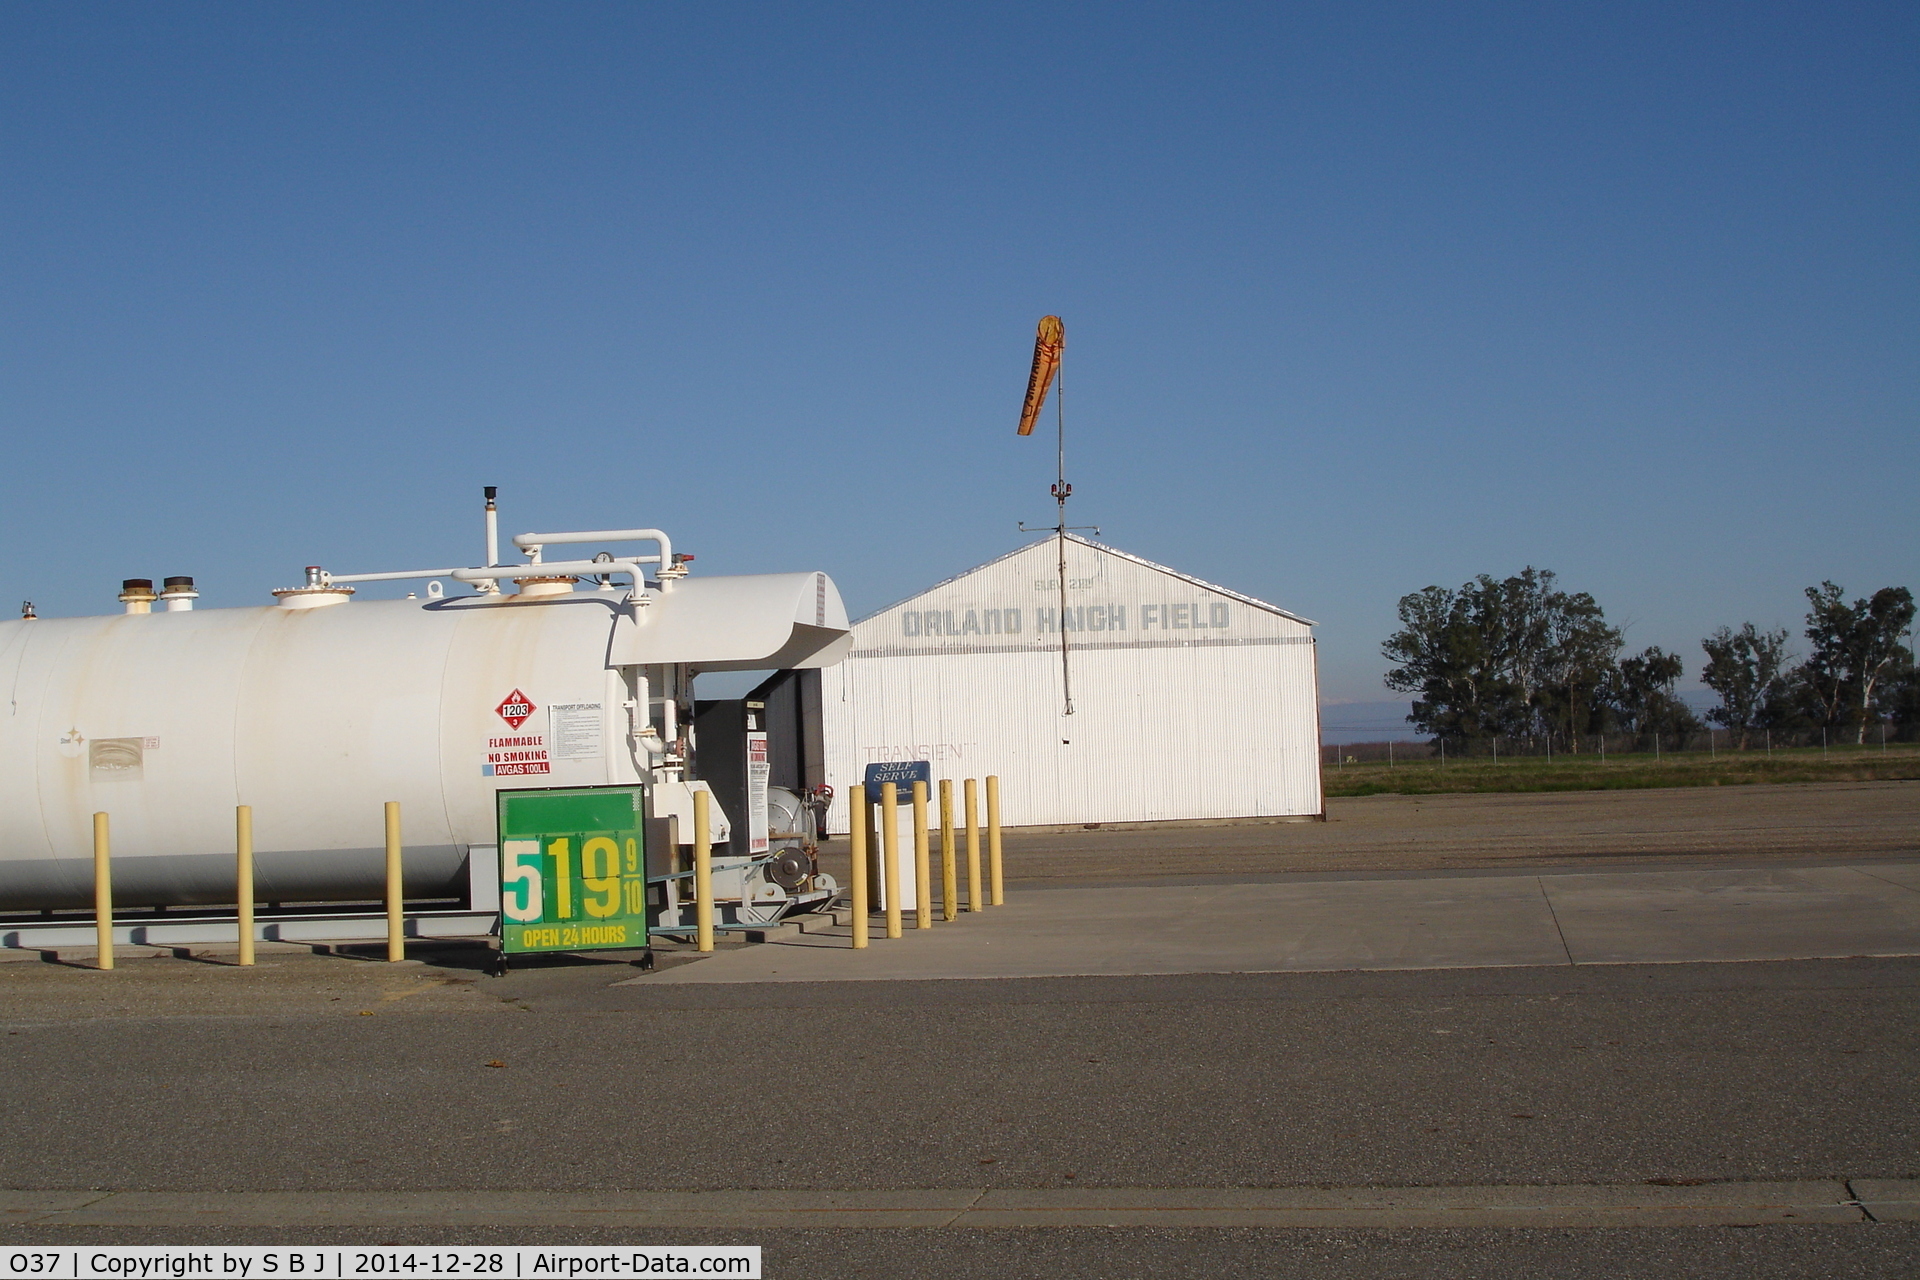 Haigh Field Airport (O37) - Haigh airport with 12- 2014 gas price.